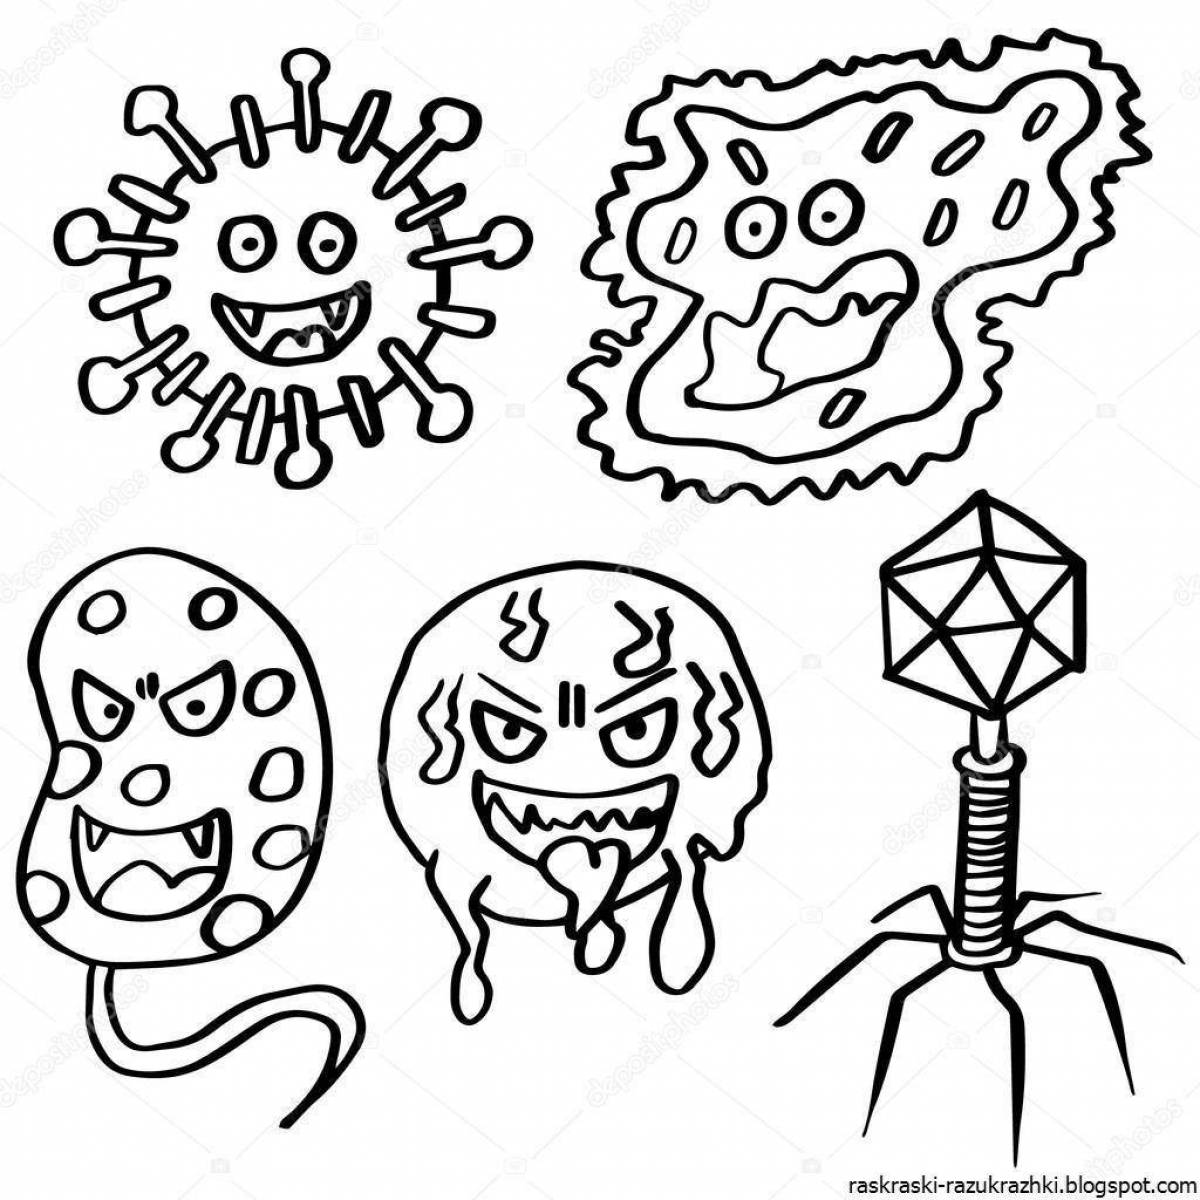 Color-filled viruses and microbes coloring page